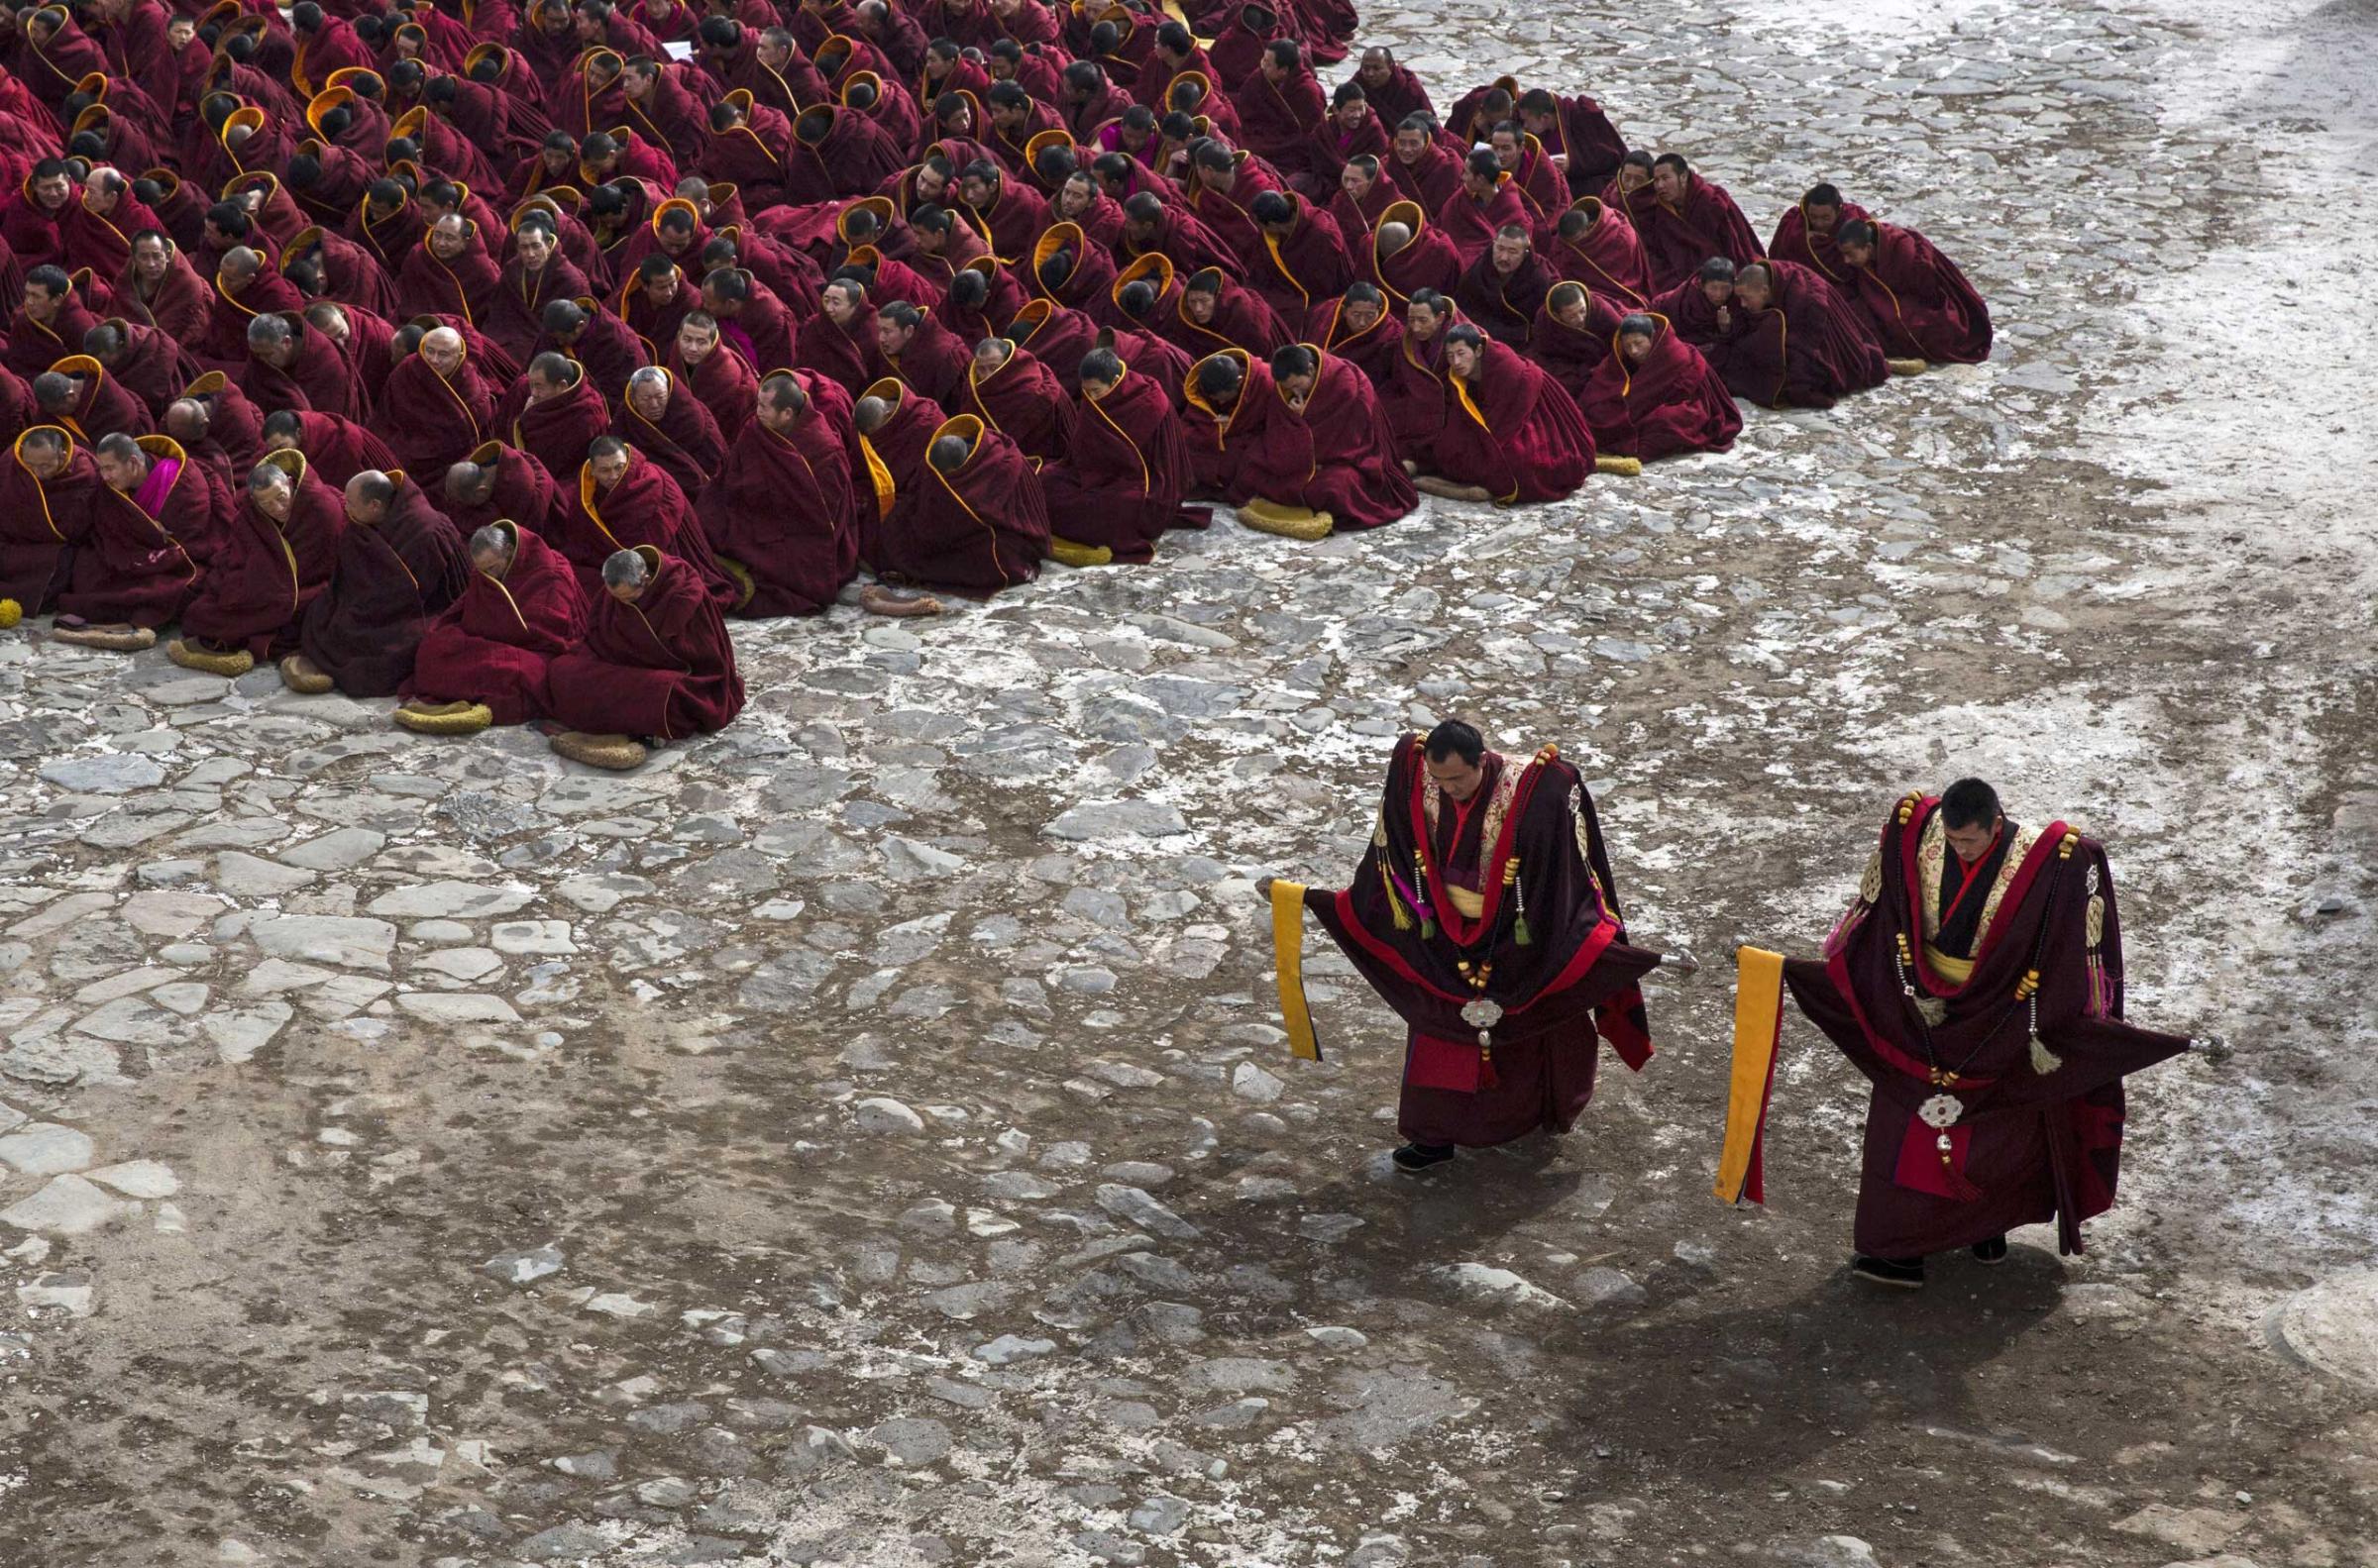 Tibetan Buddhist monks take part in a special prayer during Monlam or the Great Prayer rituals on March 5, 2015 at the Labrang Monastery.